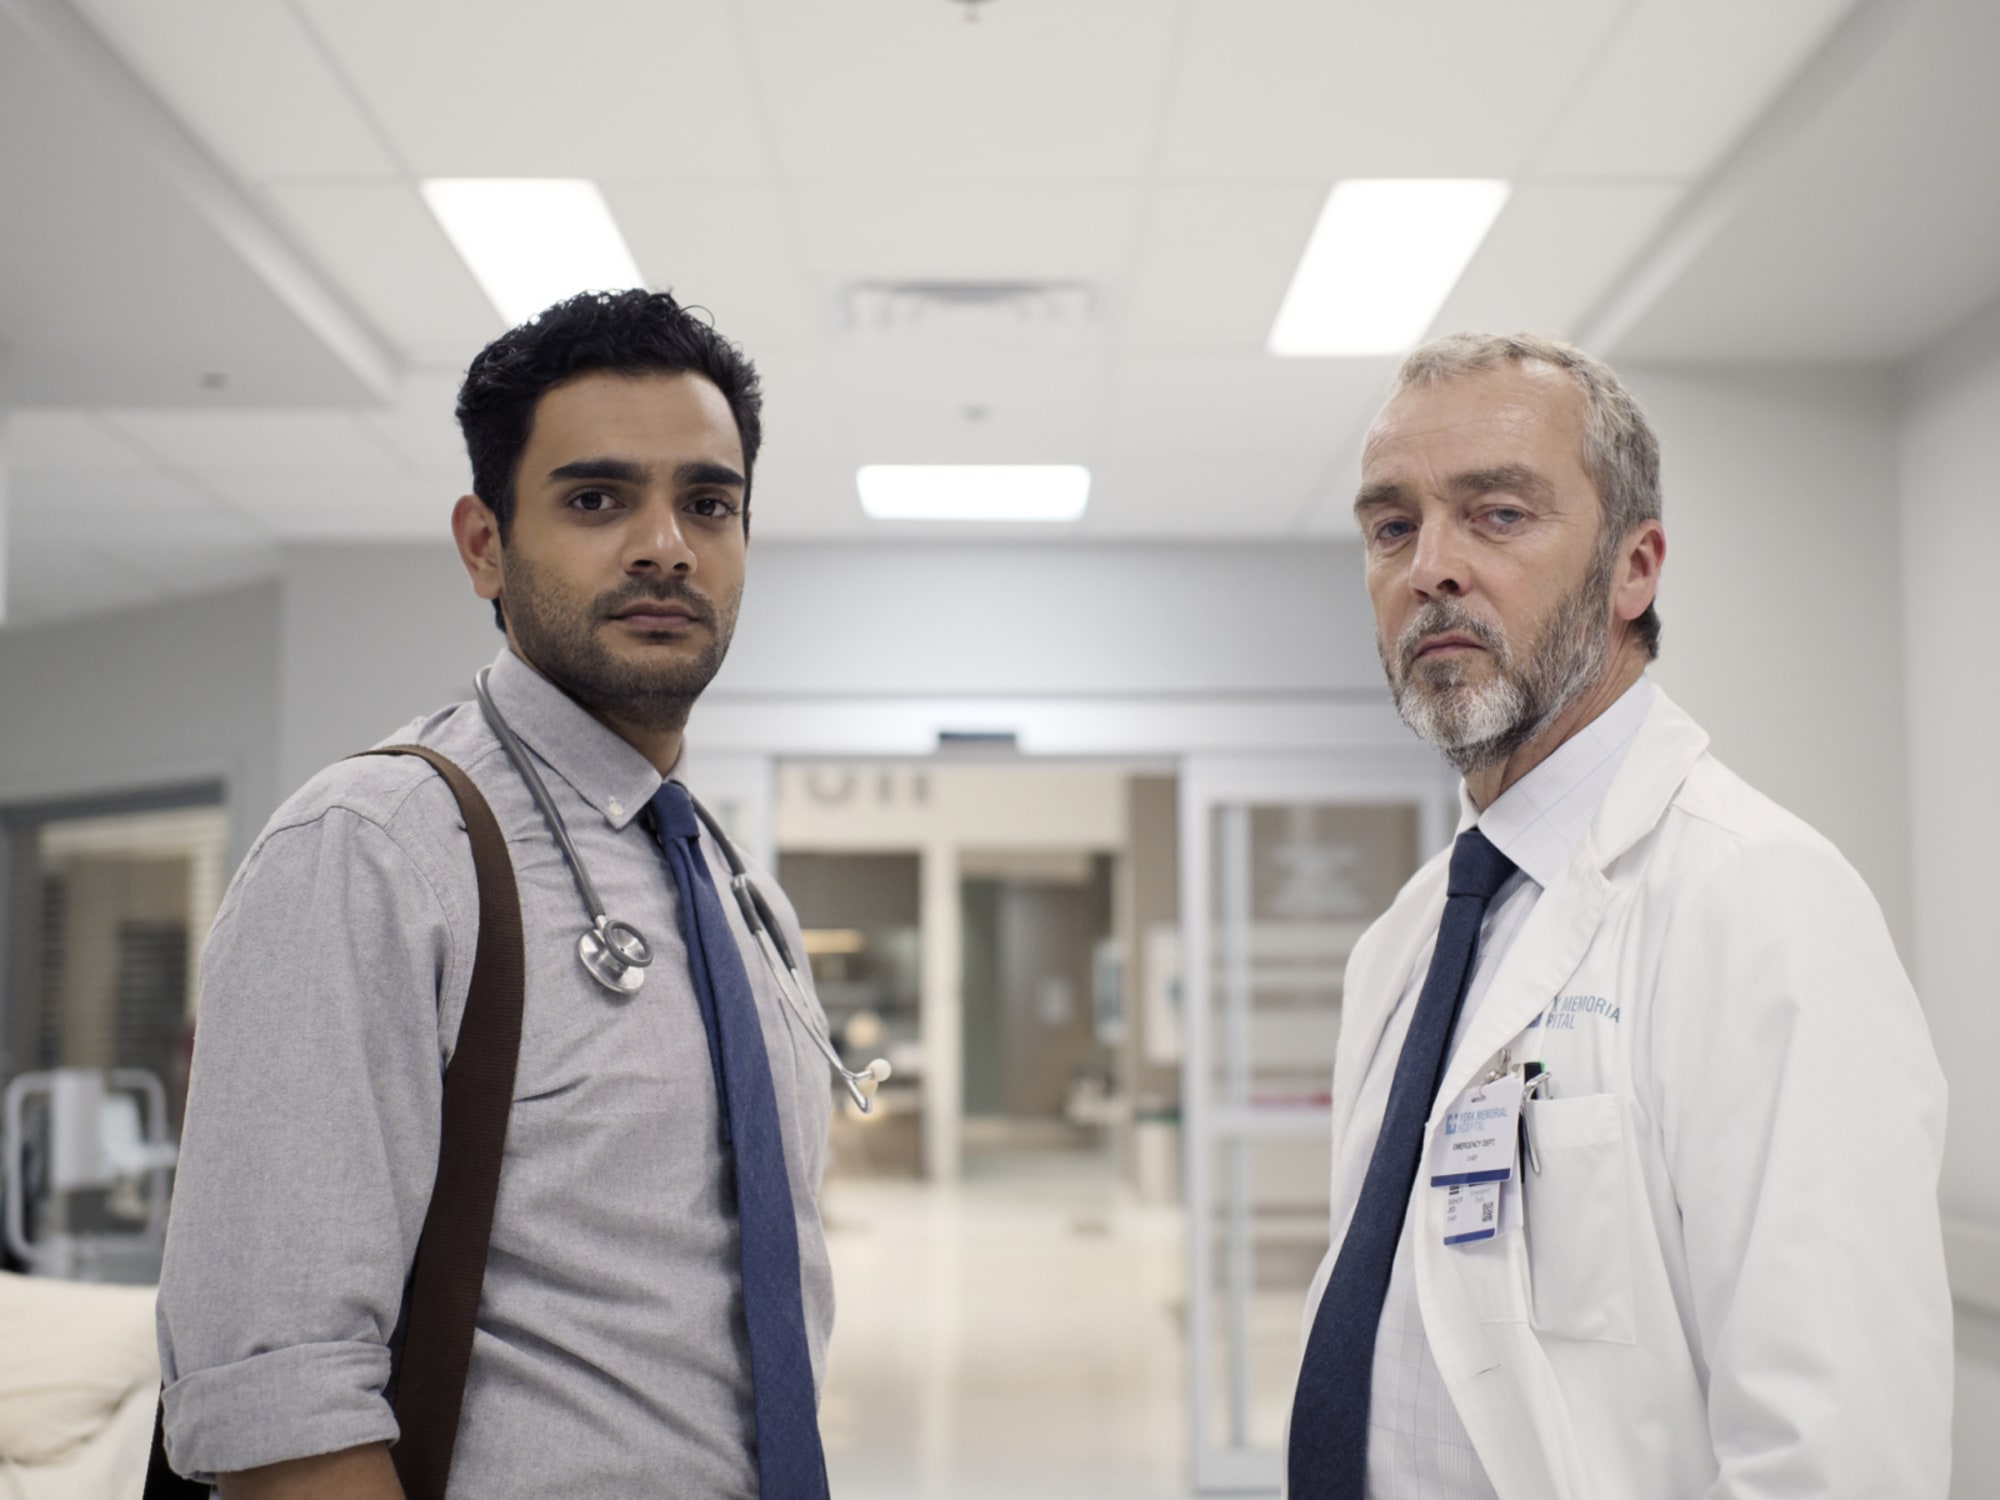 Transplant Season 2 premiere date, cast, trailer, synopsis, and more